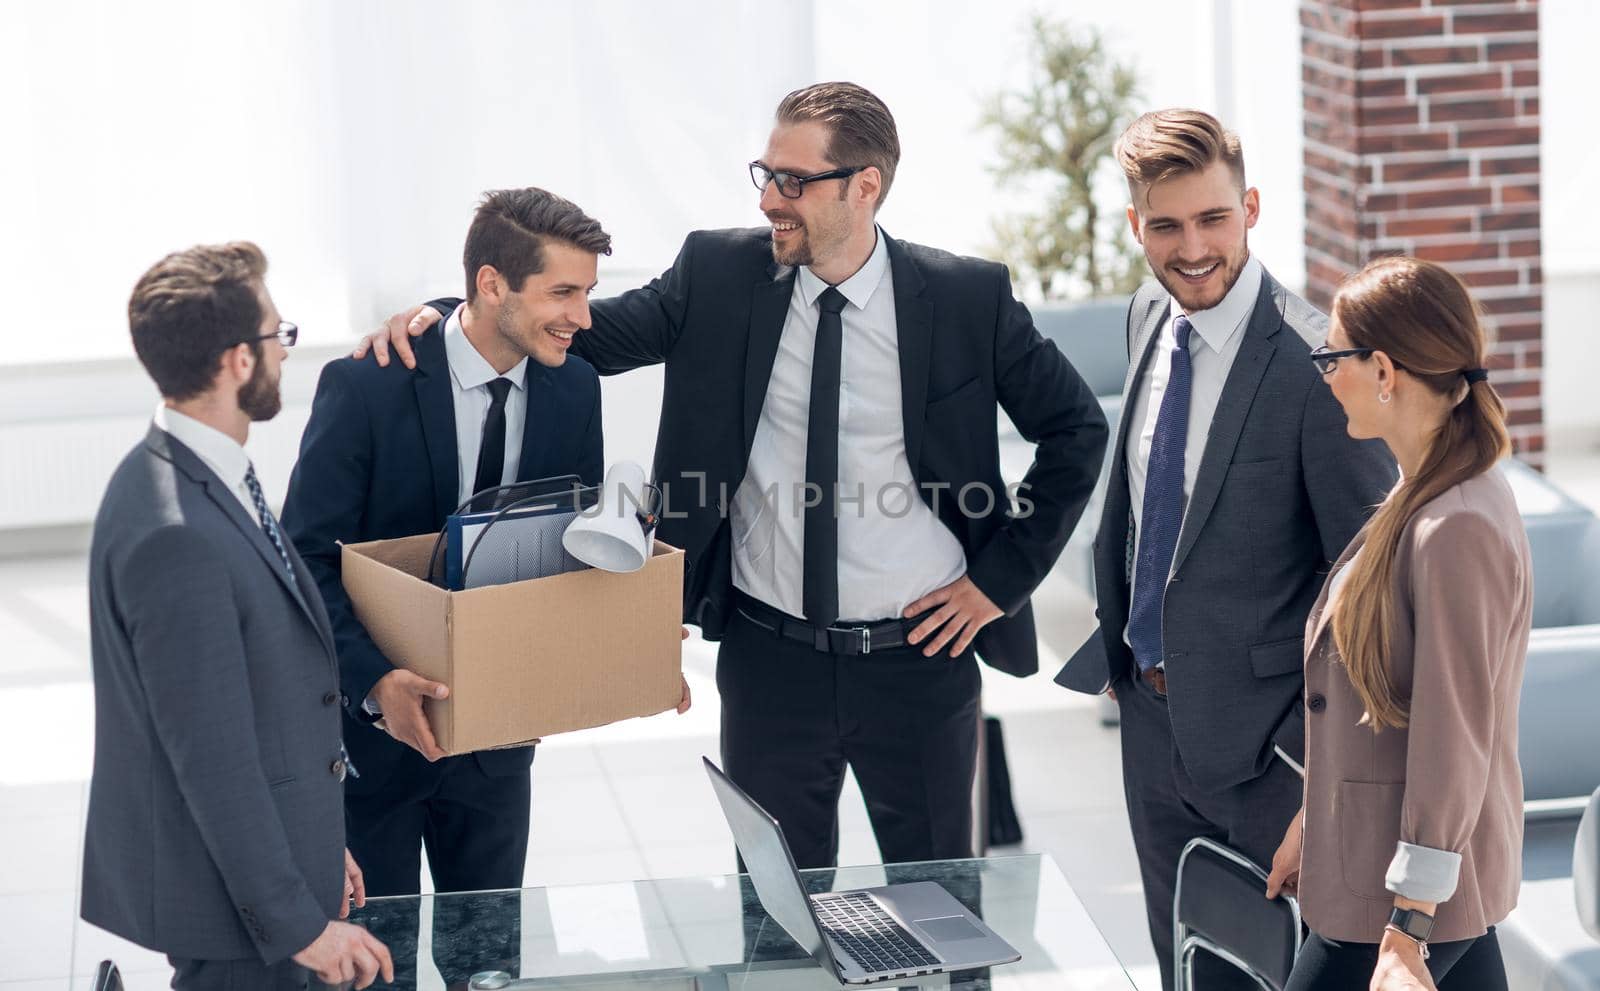 smiling business team meets new employee.photo with copy space